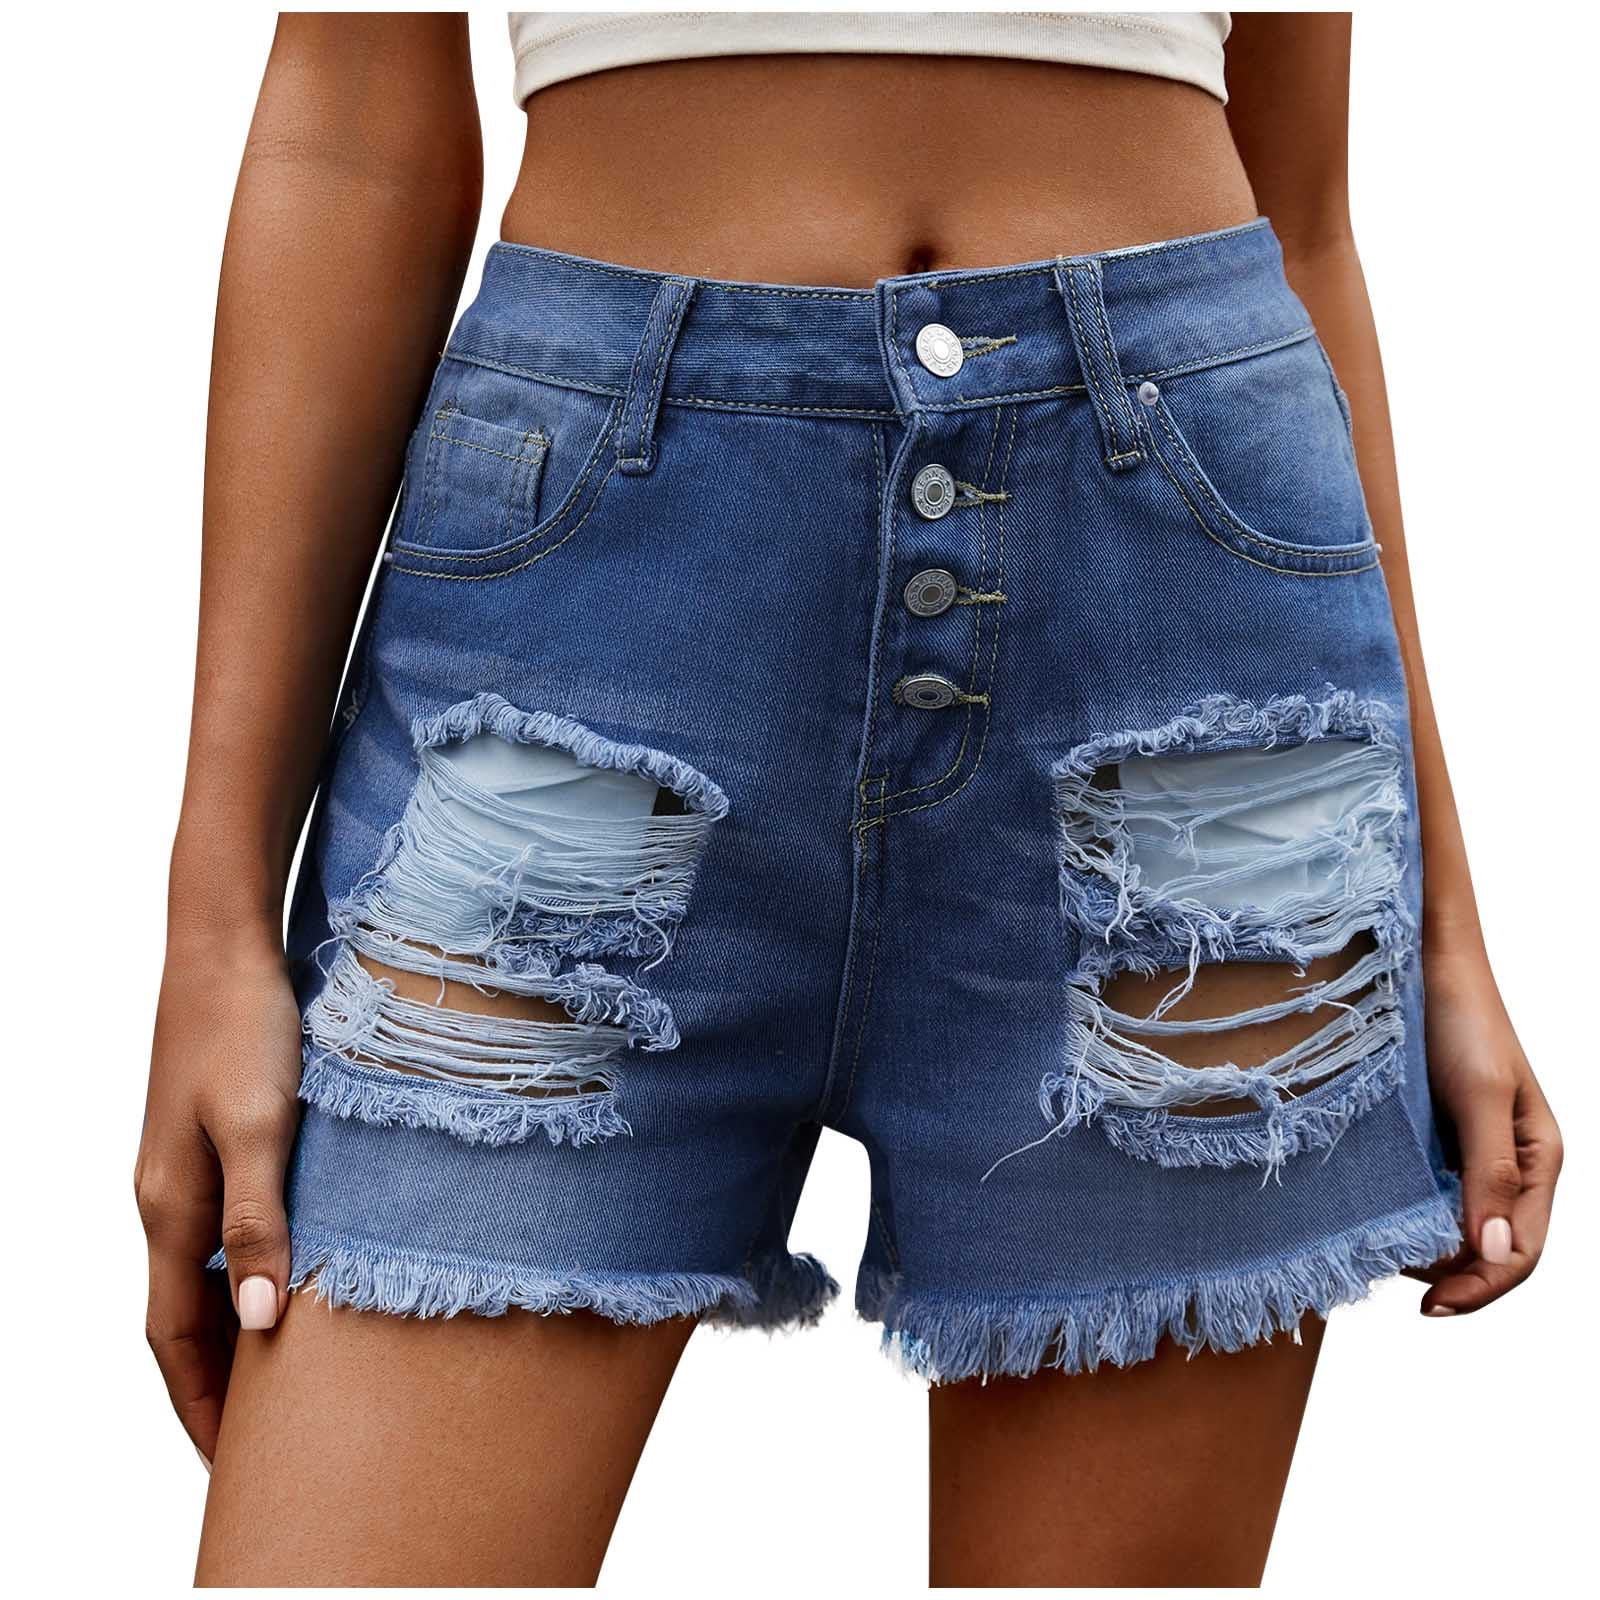 Fashion Waisted High Jean Up JWZUY Blue Shorts Denim Frayed Cut Distressed Button Shorts Summer Ripped Womens L Shorts Off Jean